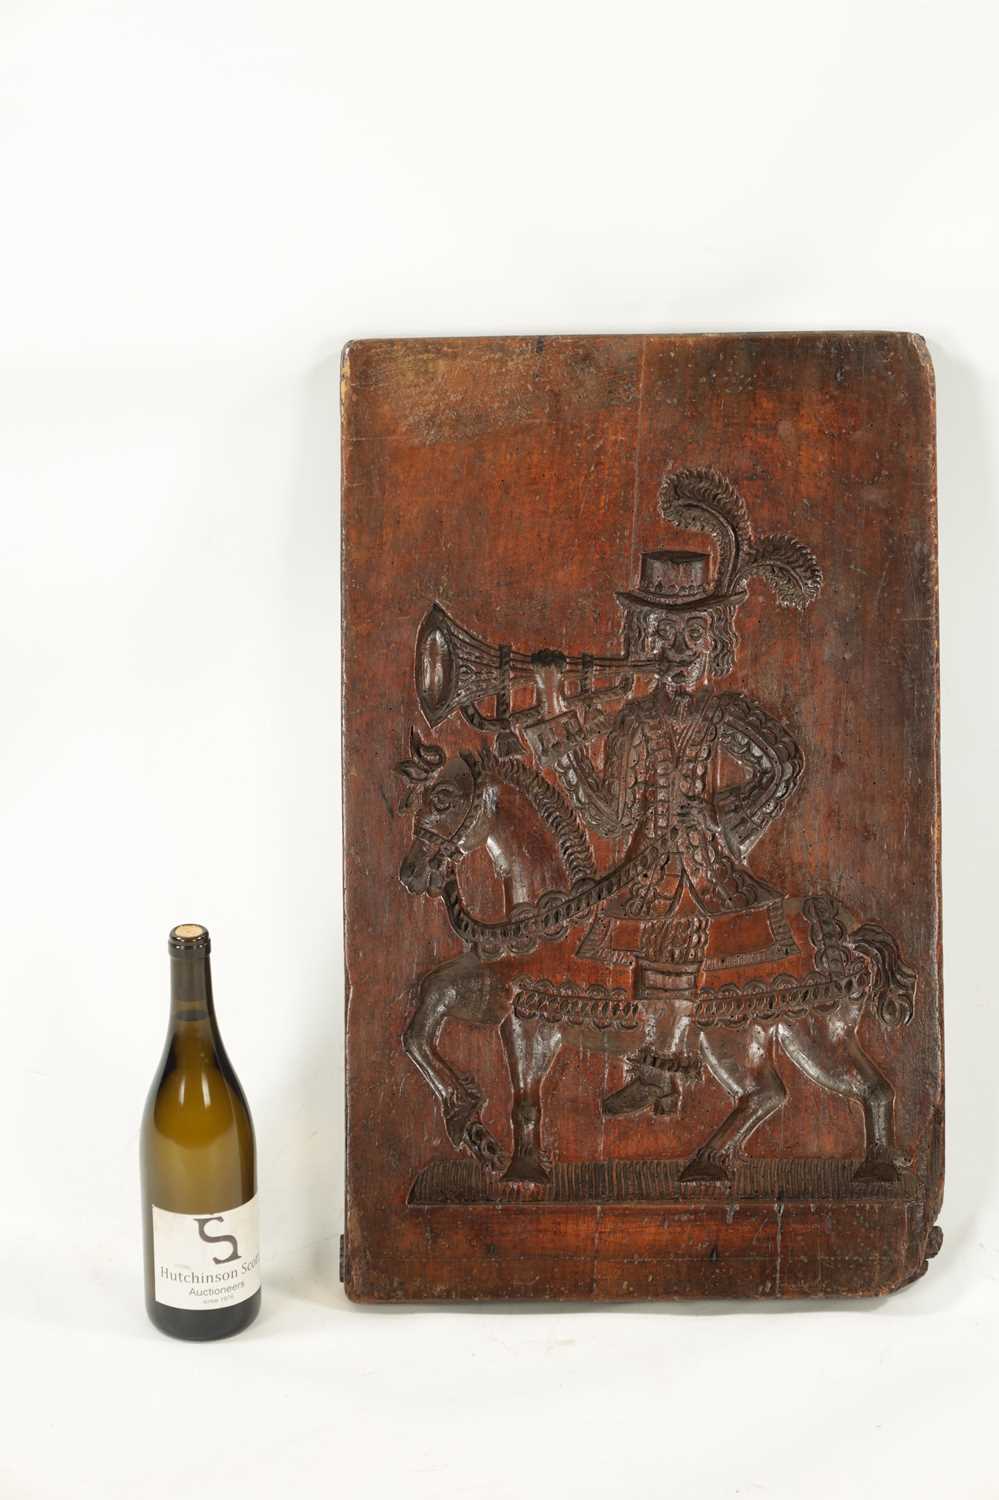 AN 18TH CENTURY CARVED FRUITWOOD GINGER BREAD MOULD - Image 2 of 4